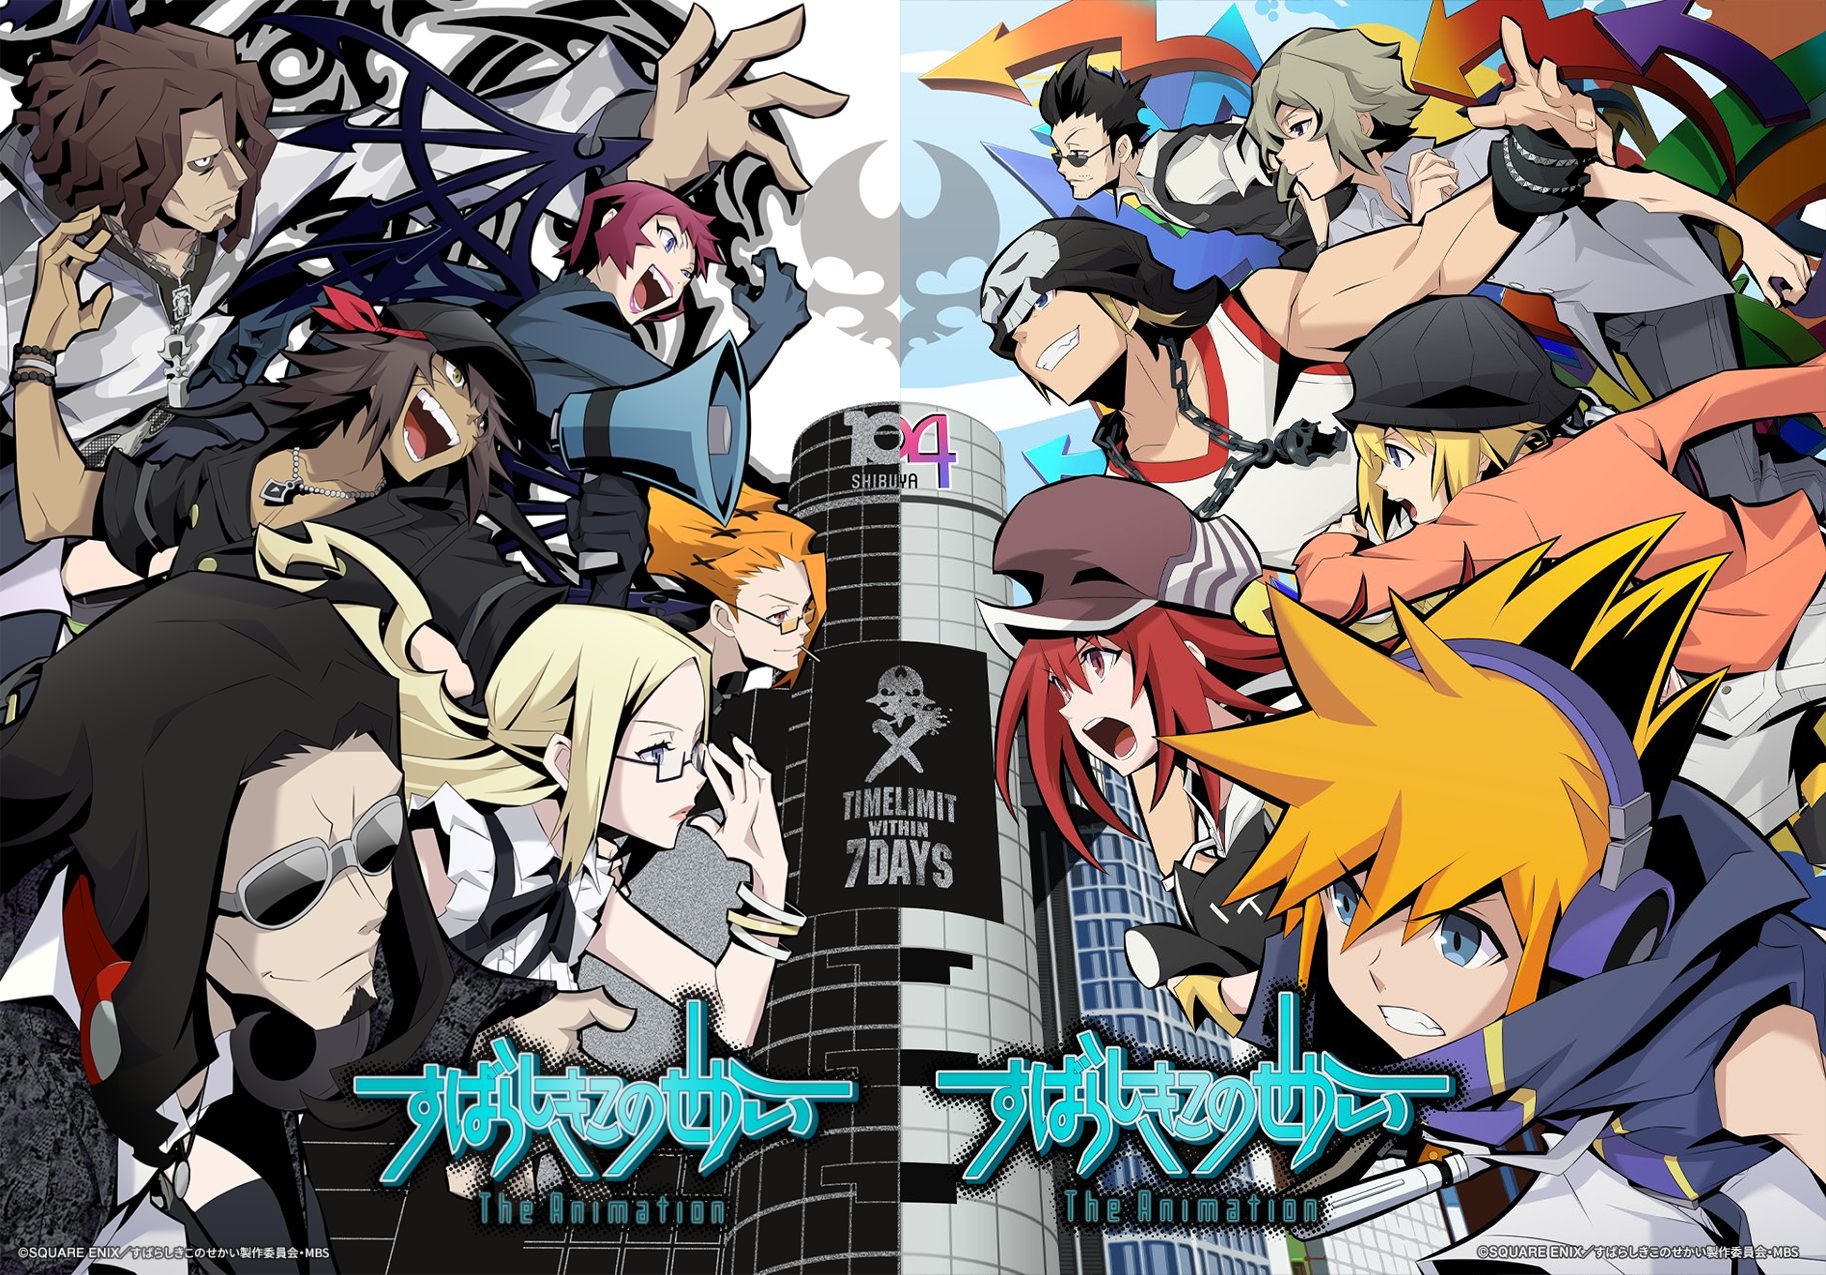 The World Ends With You Anime Will Premiere Next Year, Here's The First  Trailer - GameSpot